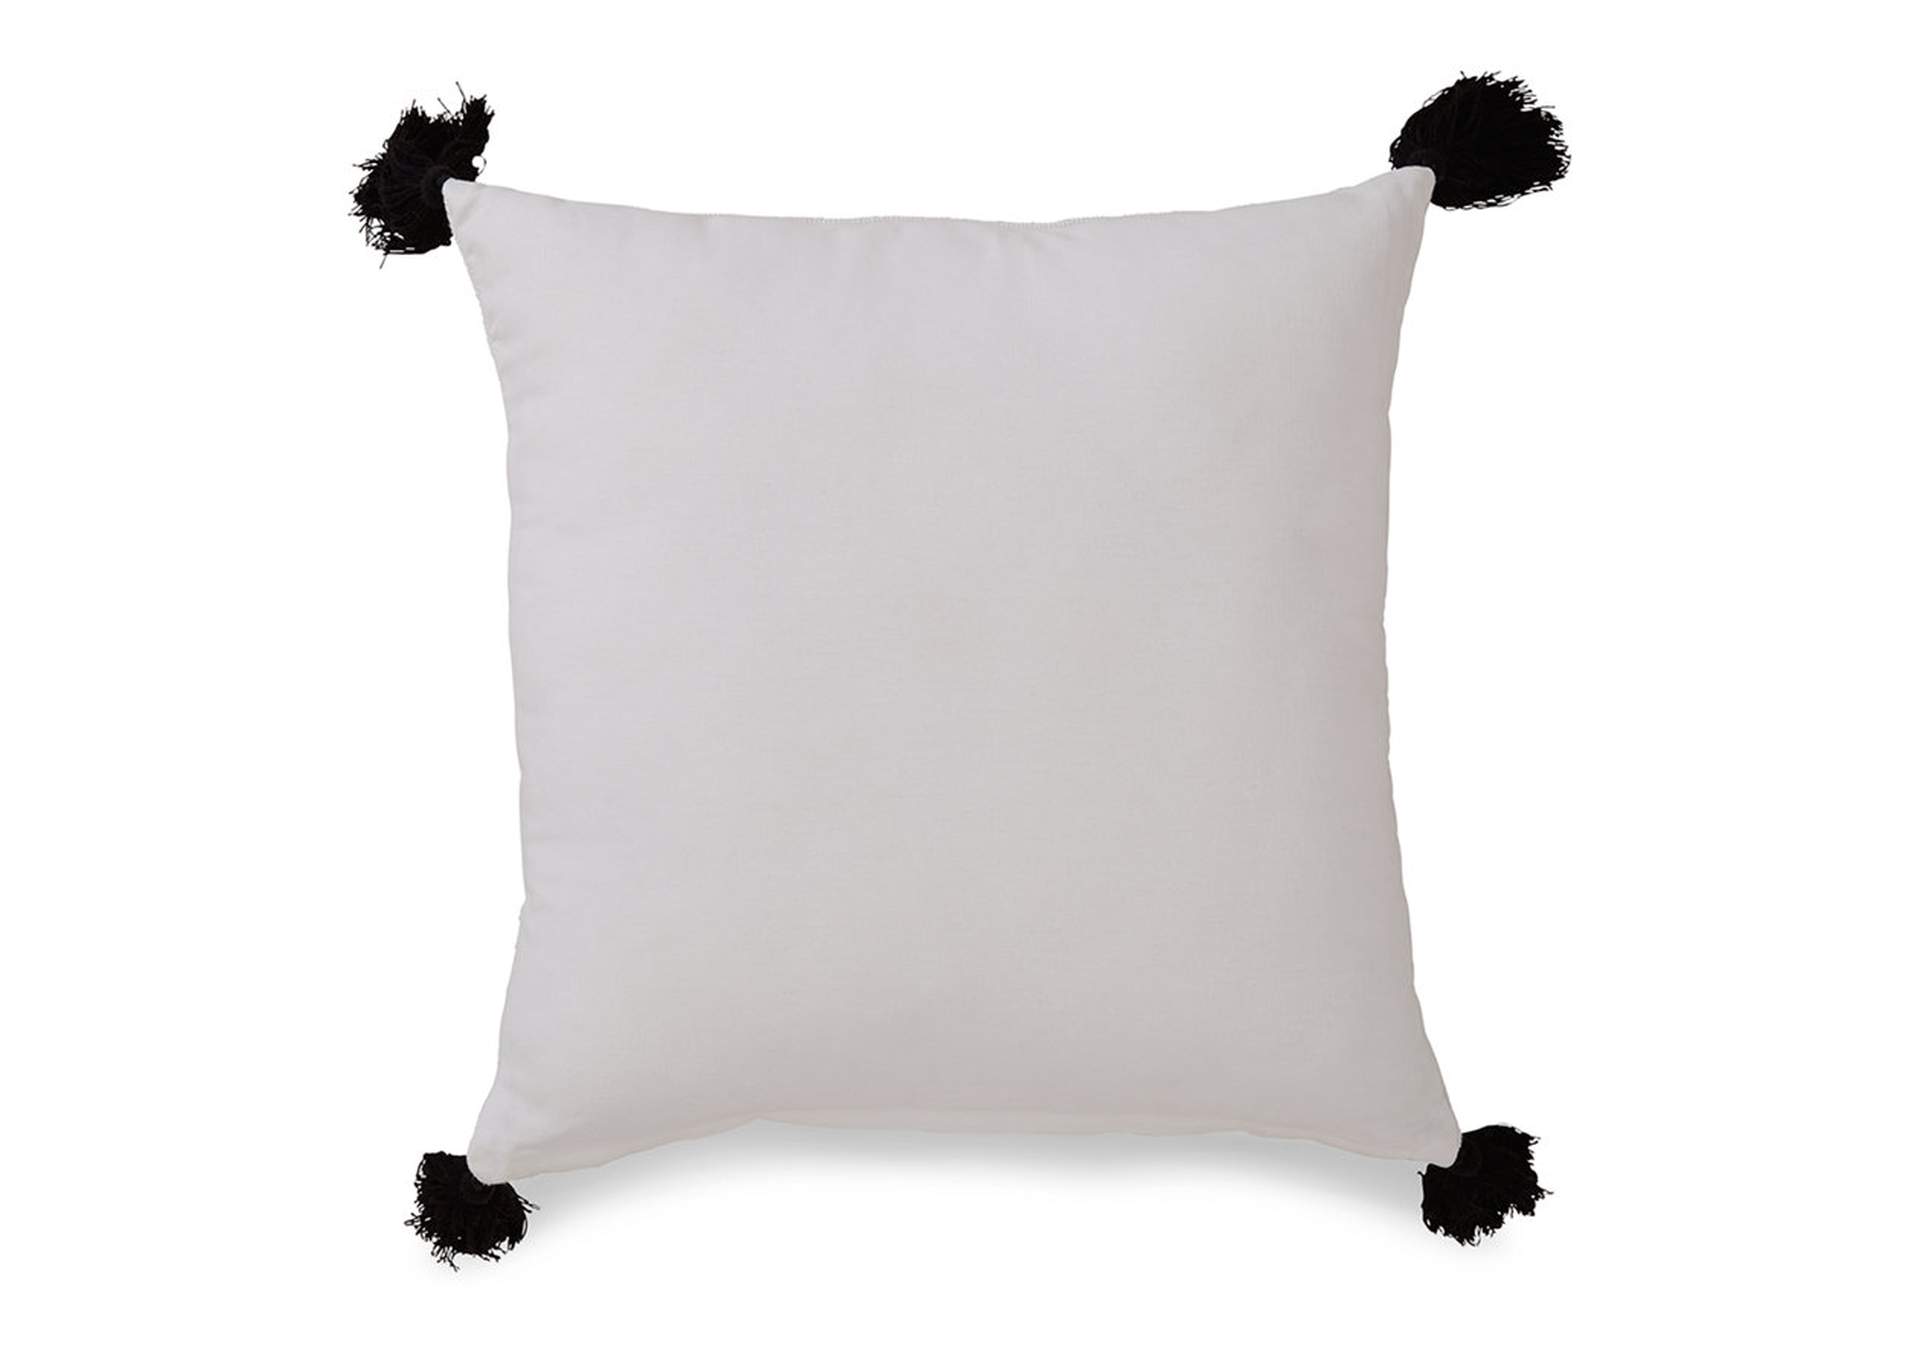 Mudderly Pillow,Signature Design By Ashley